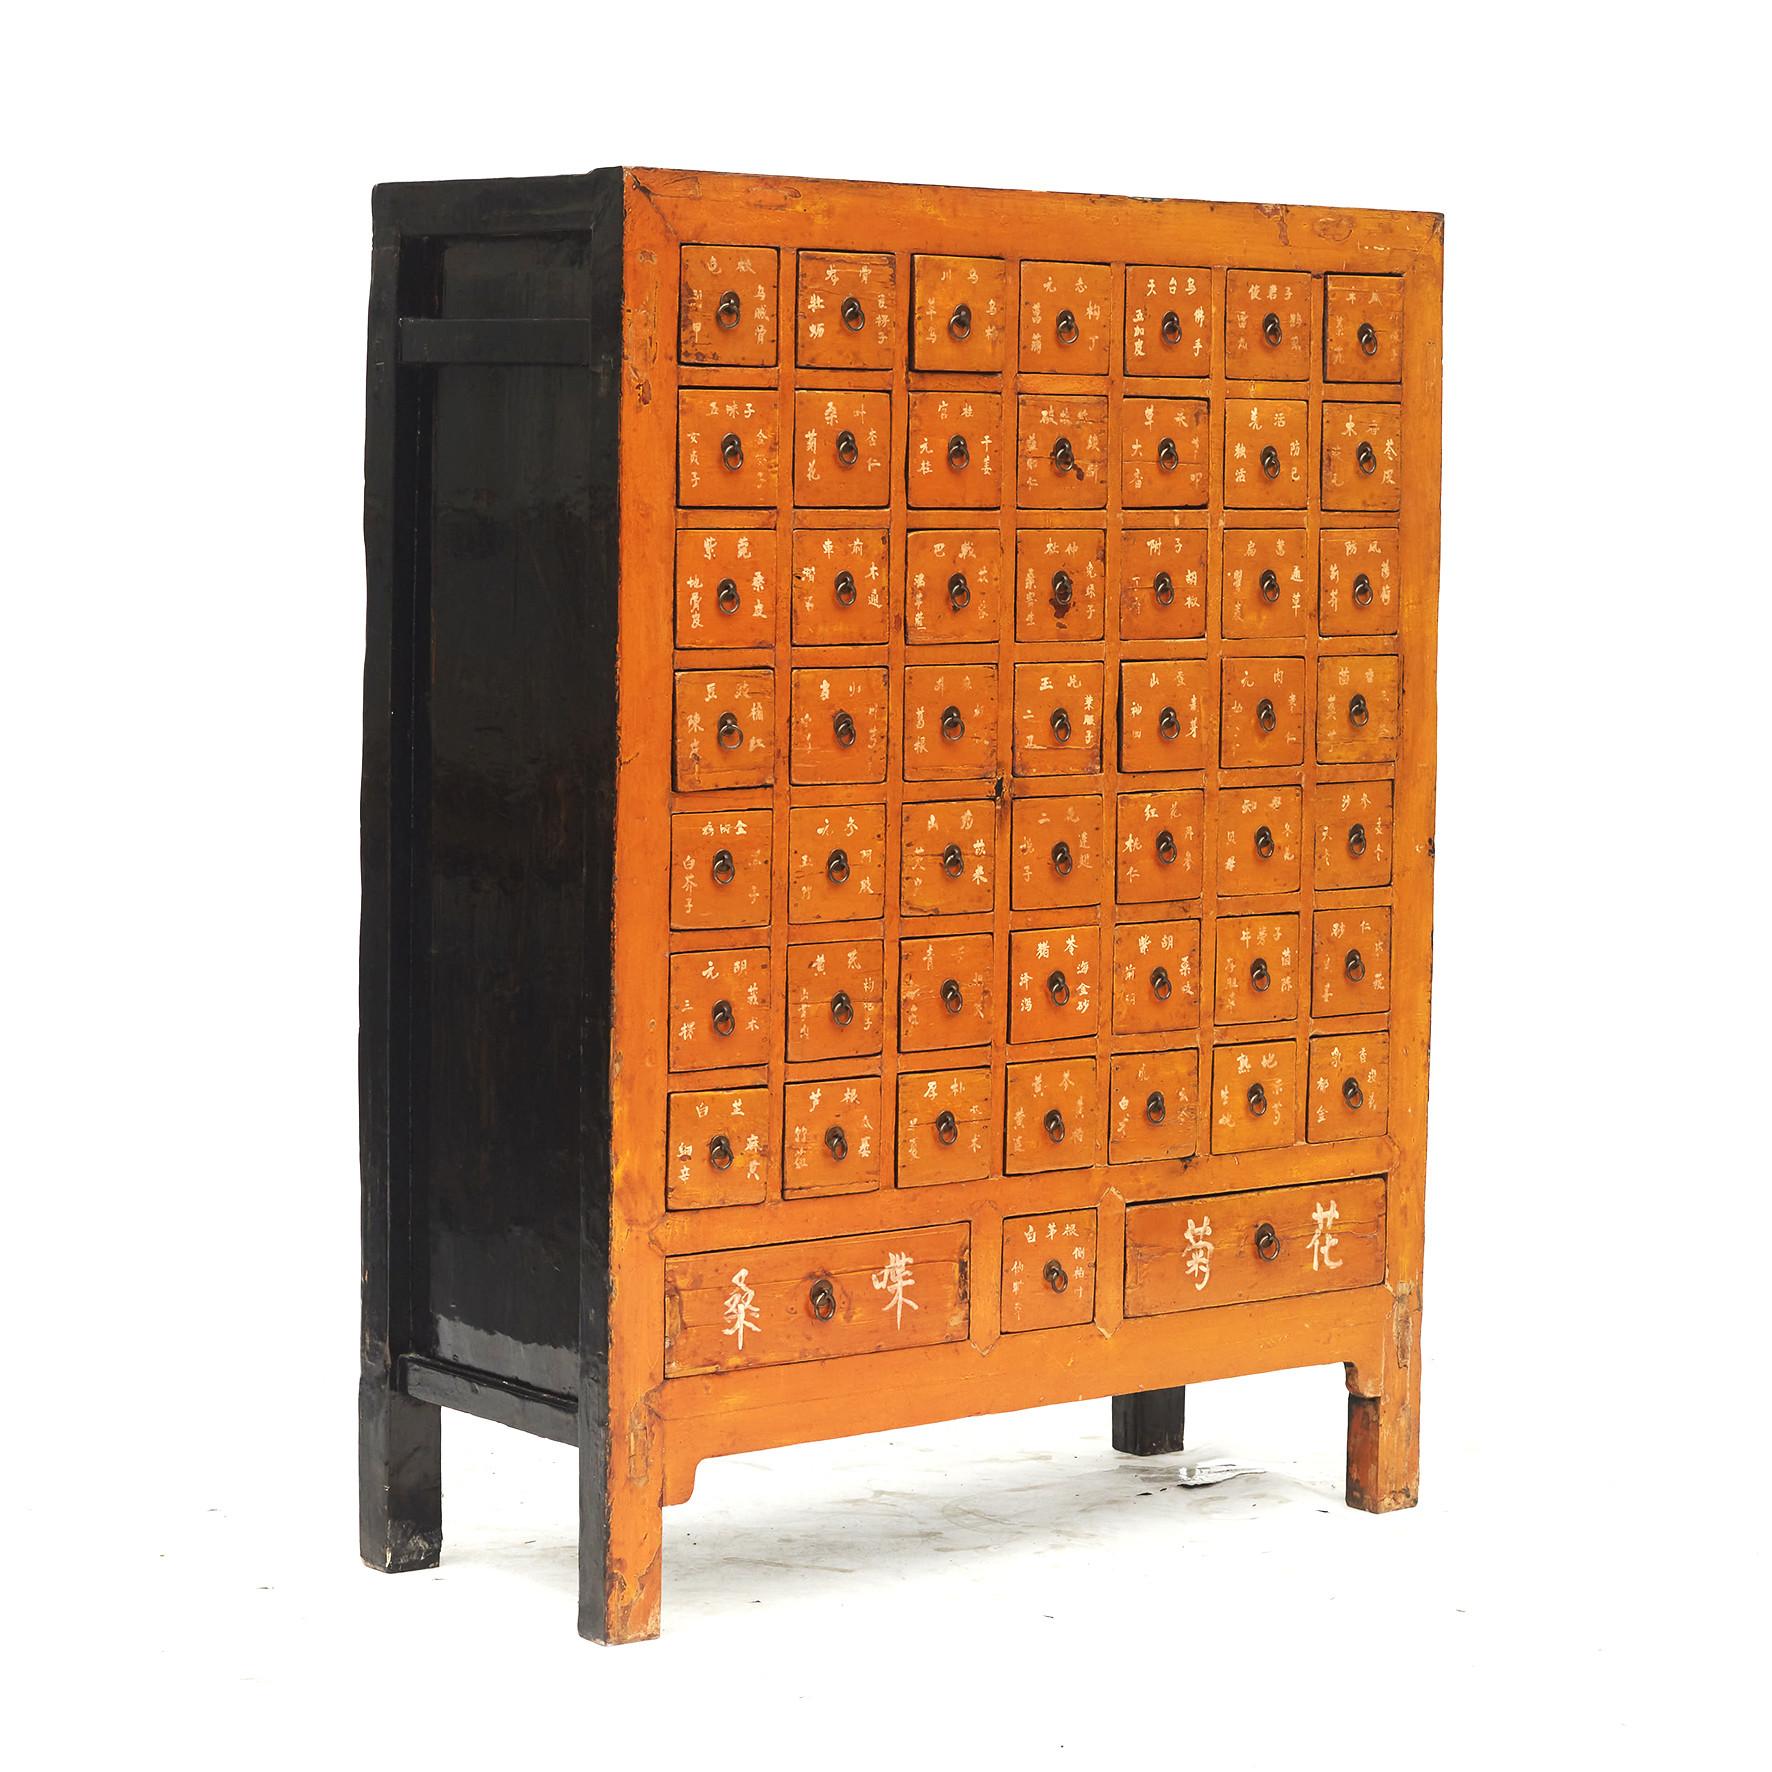 Apothecary Medicine Chest with 52 Drawers 4